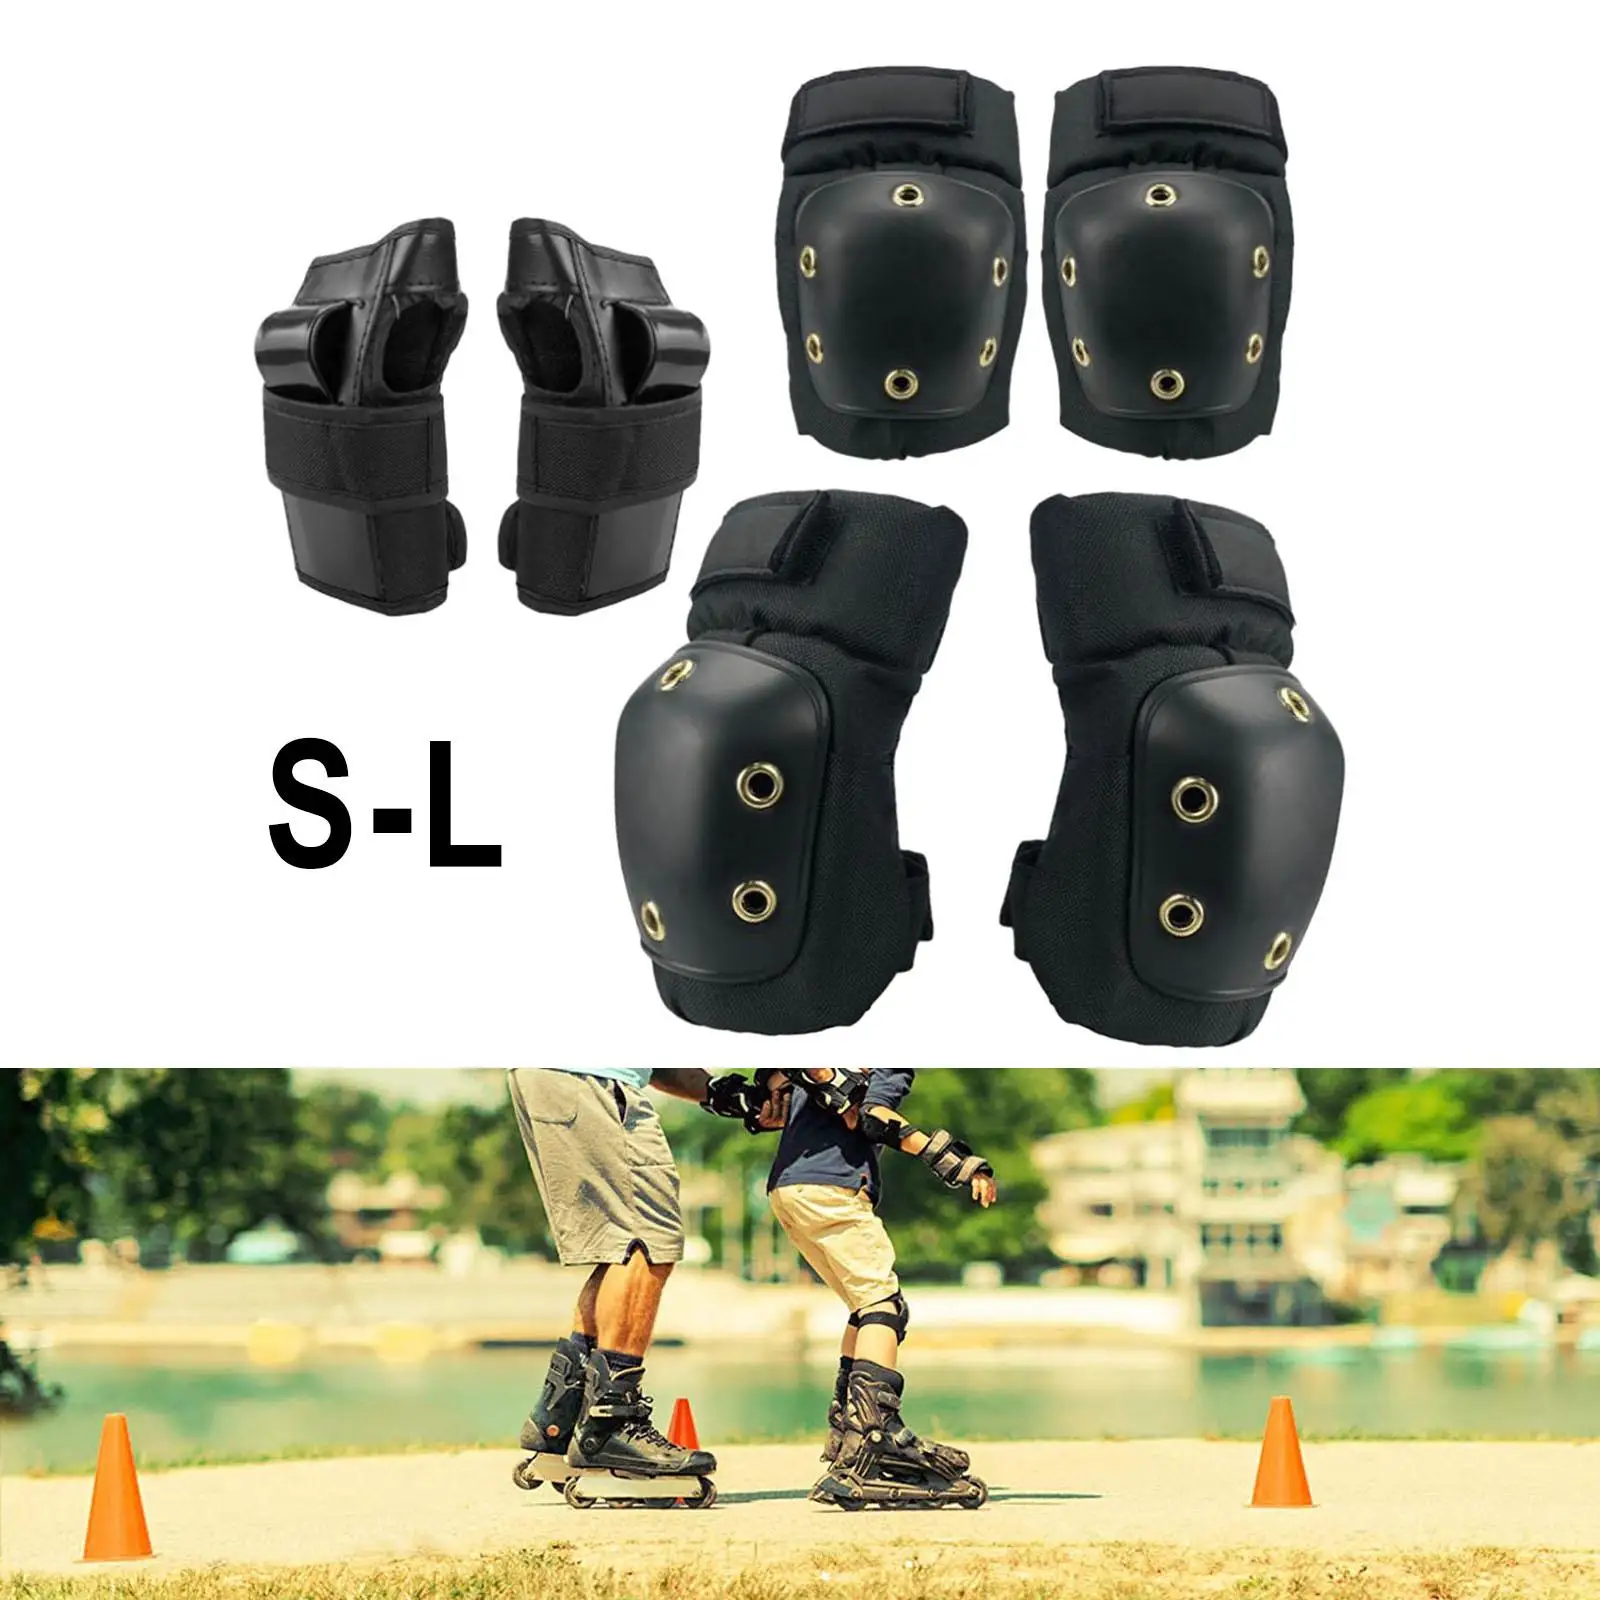 Kids Child Teens Outdoor Sports Protective Gear Knee Elbow Pad Riding Wrist Guards Roller Skating Skateboard Protection